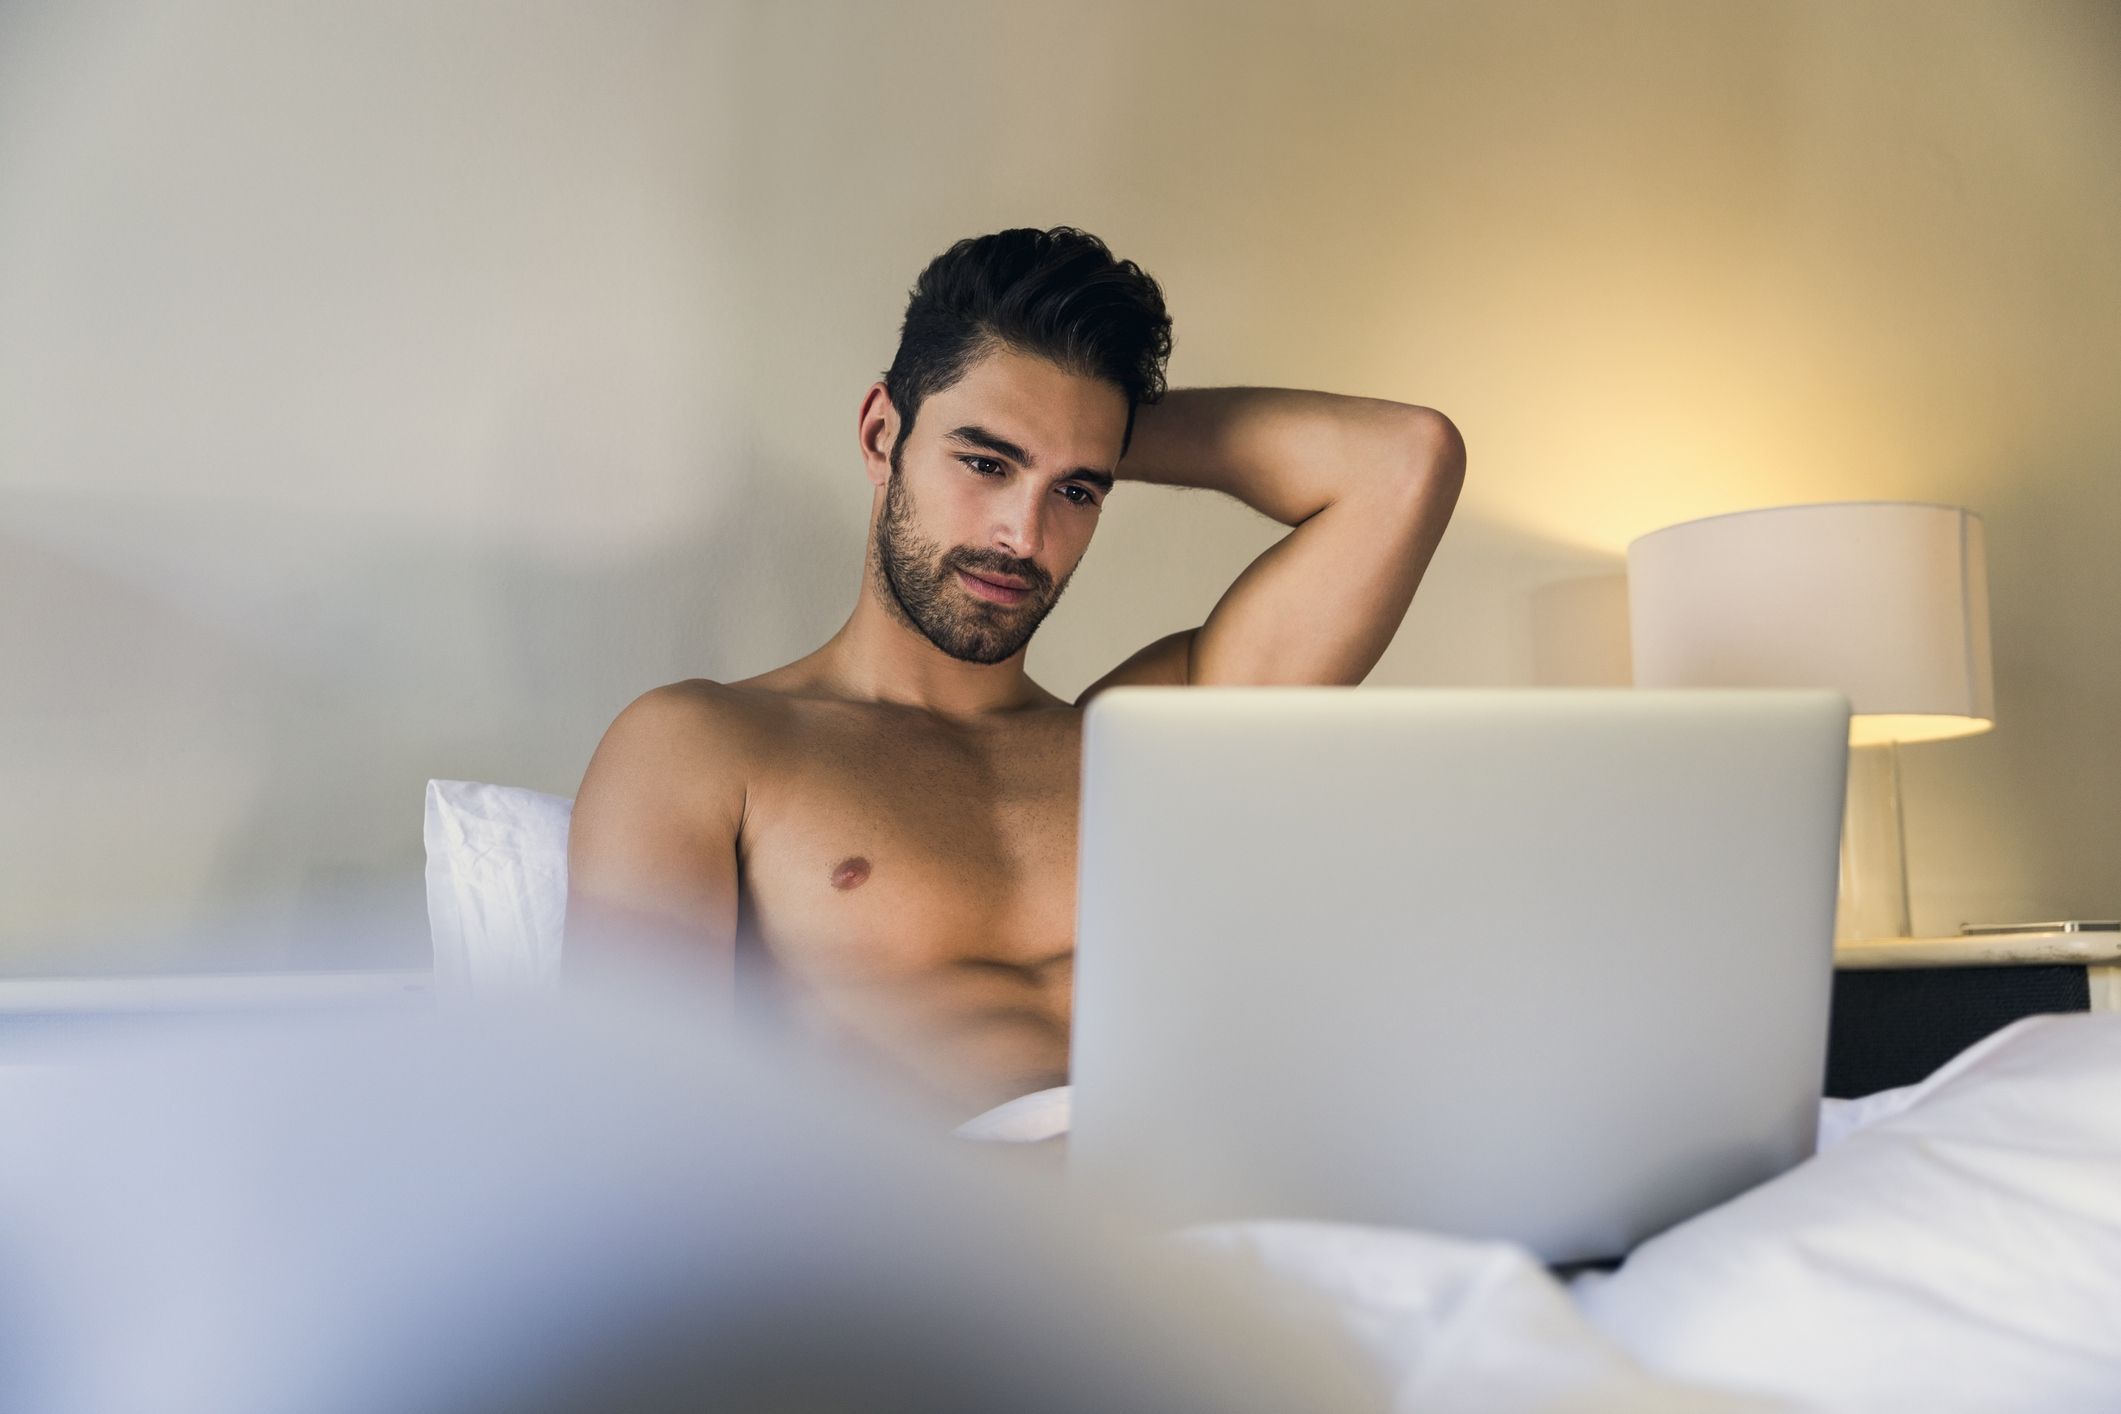 Spam Pron Videos - How to Browse Porn Sites Safely Without Getting Hacked